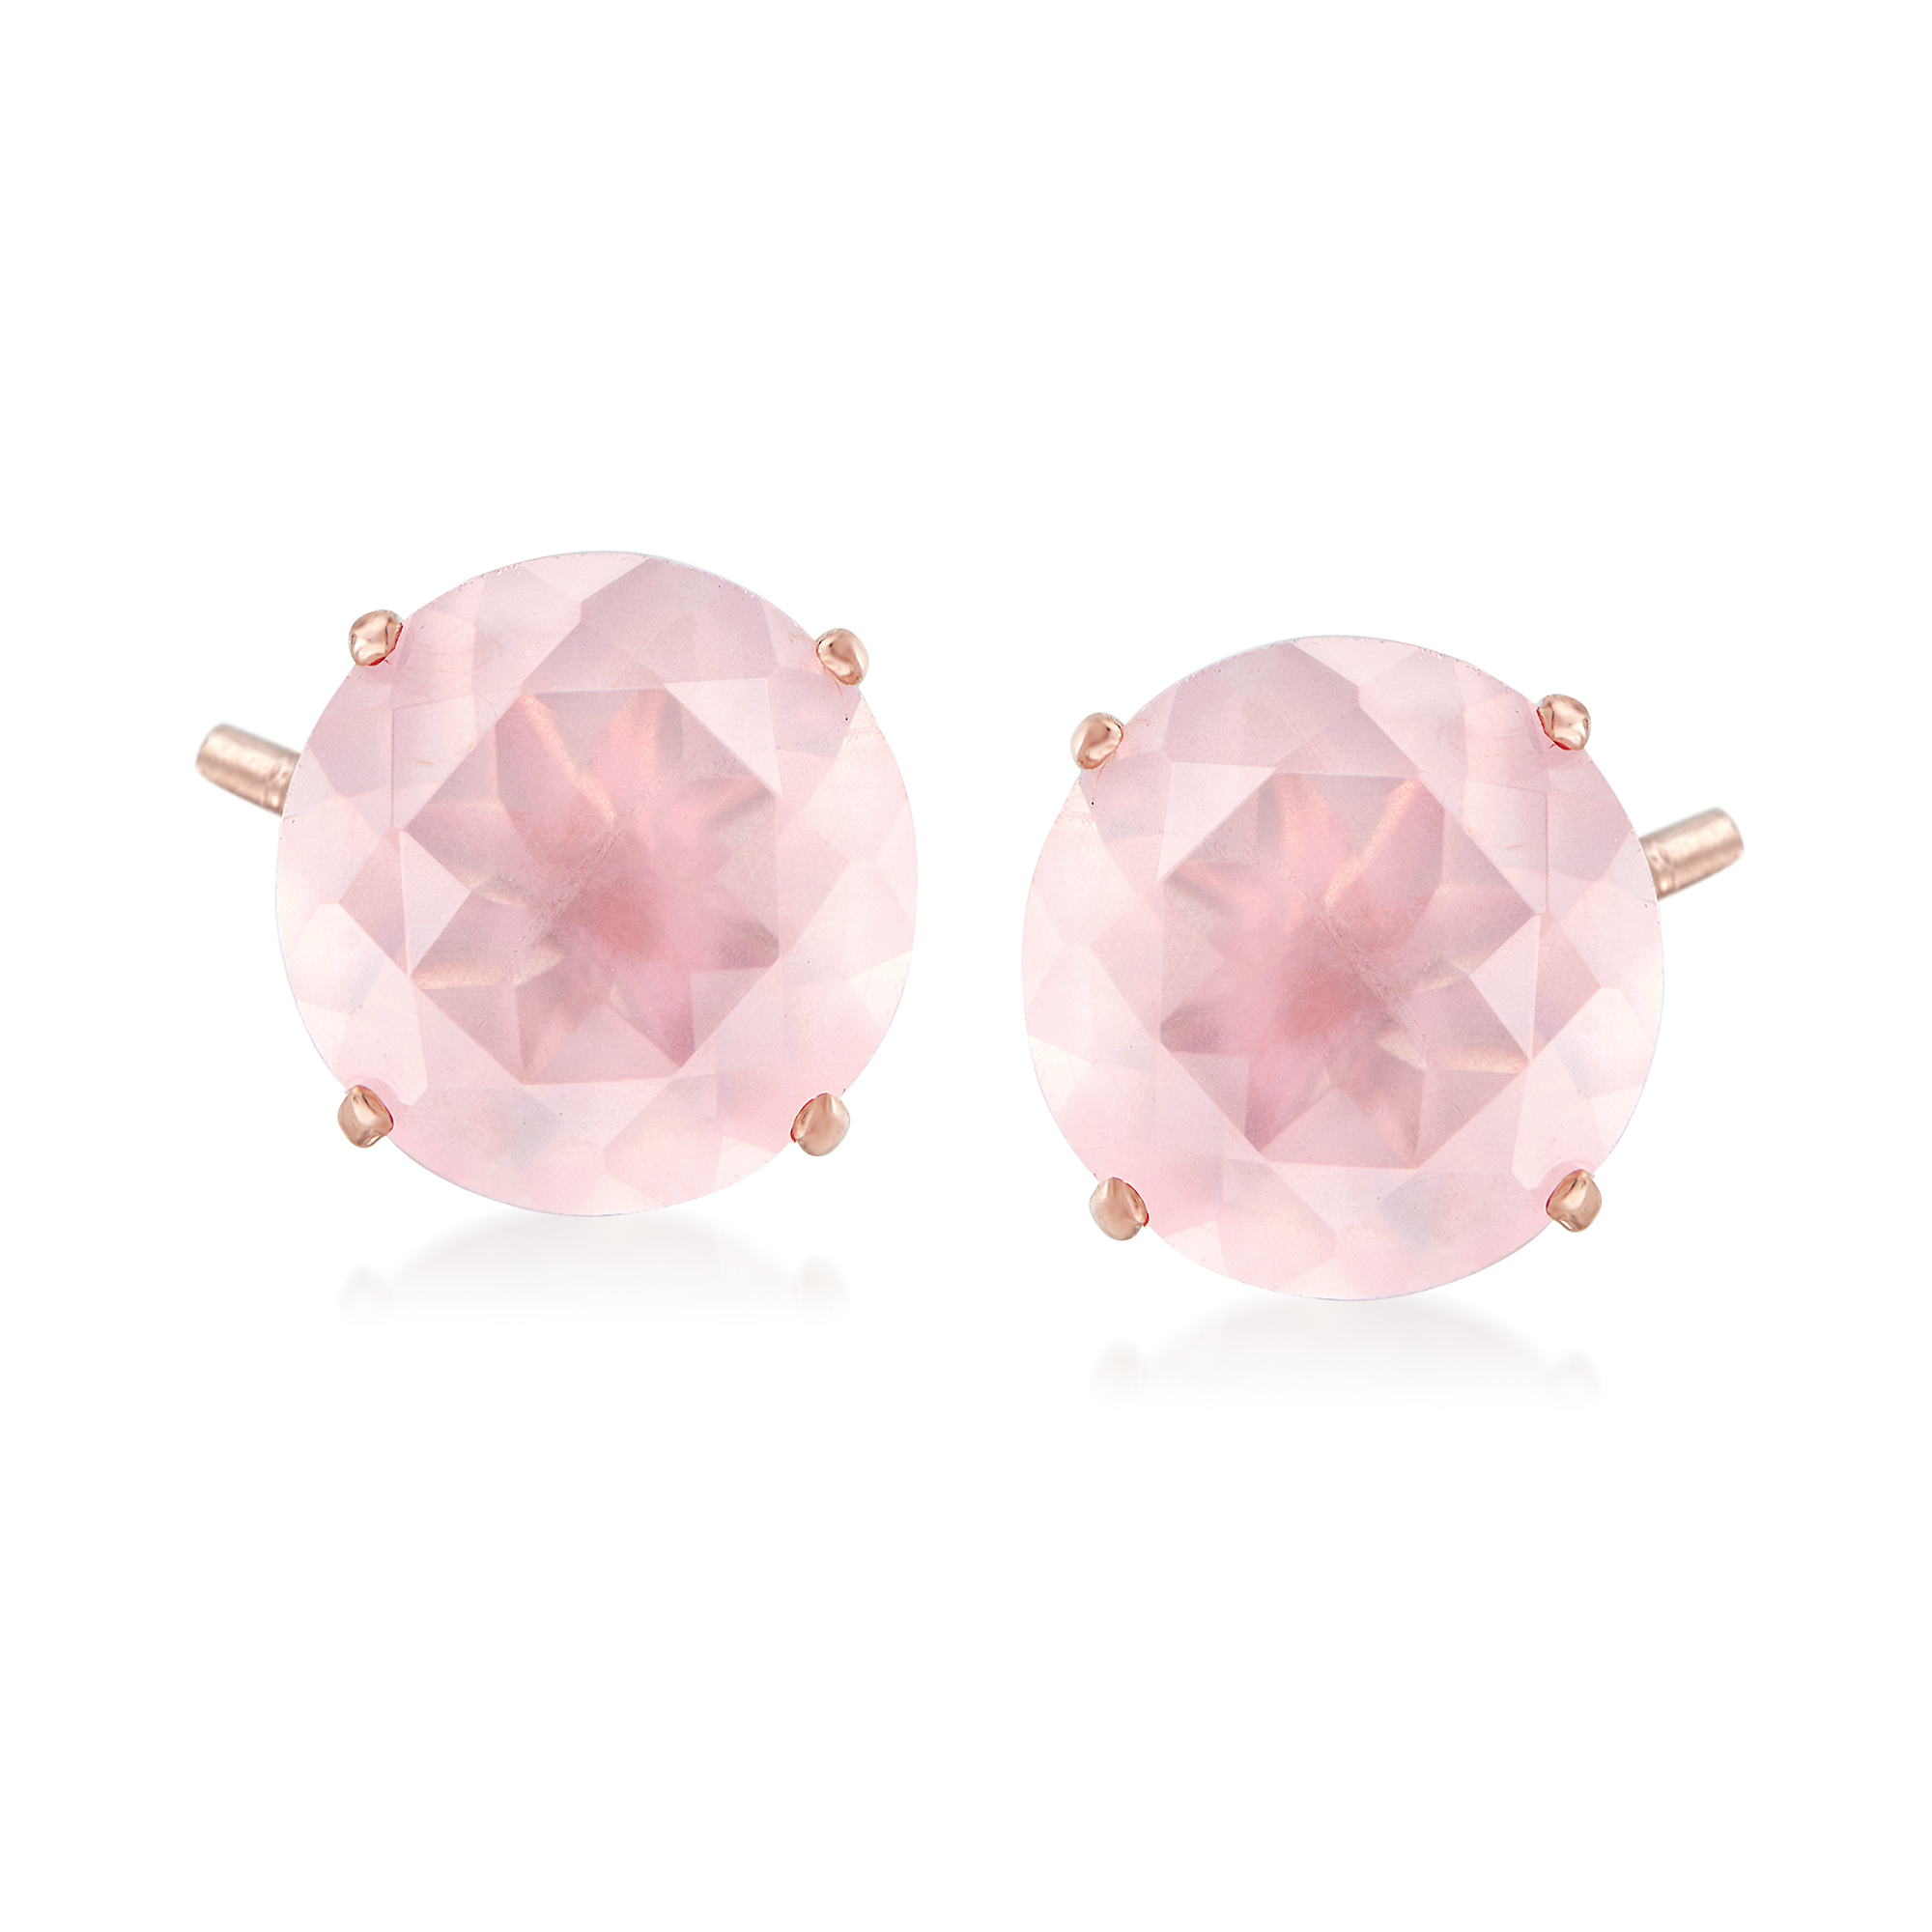 Rose Quartz post / stud Earrings Sterling Silver Free Ship in USA ! 1 Pair 